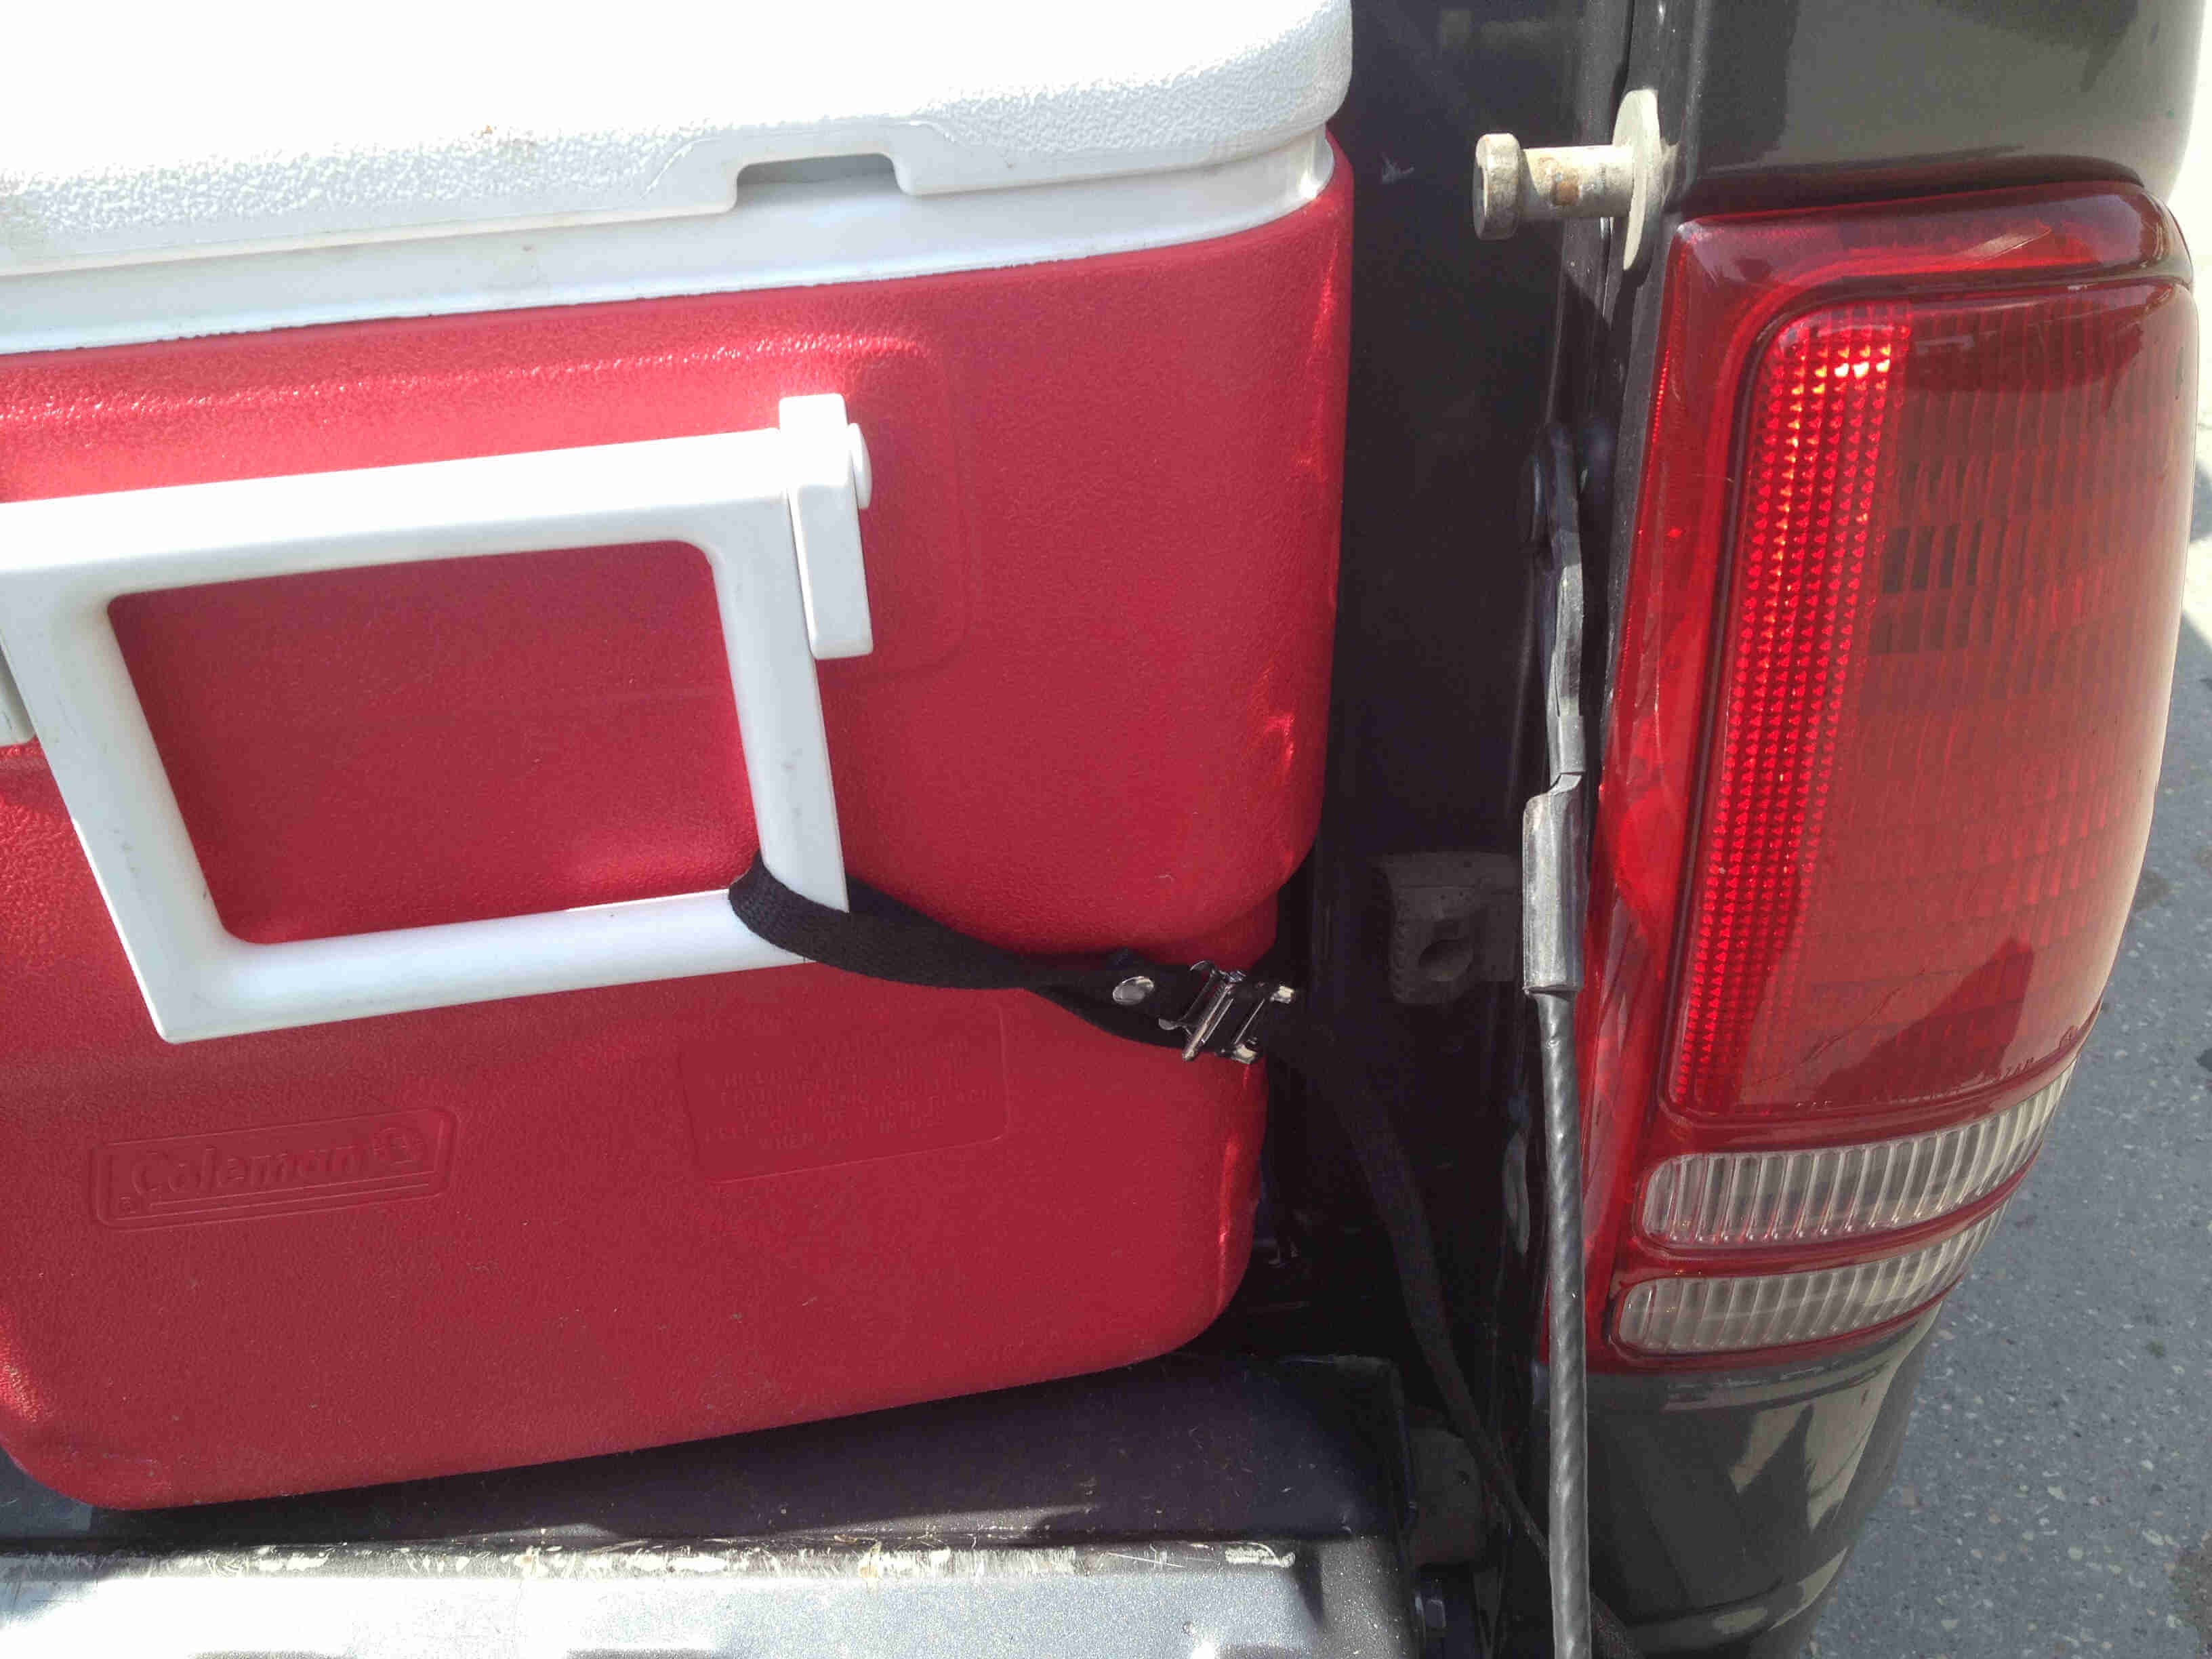 Close up view of a red cooler, strapped into a pickup truck bed, using a Surly Junk Strap